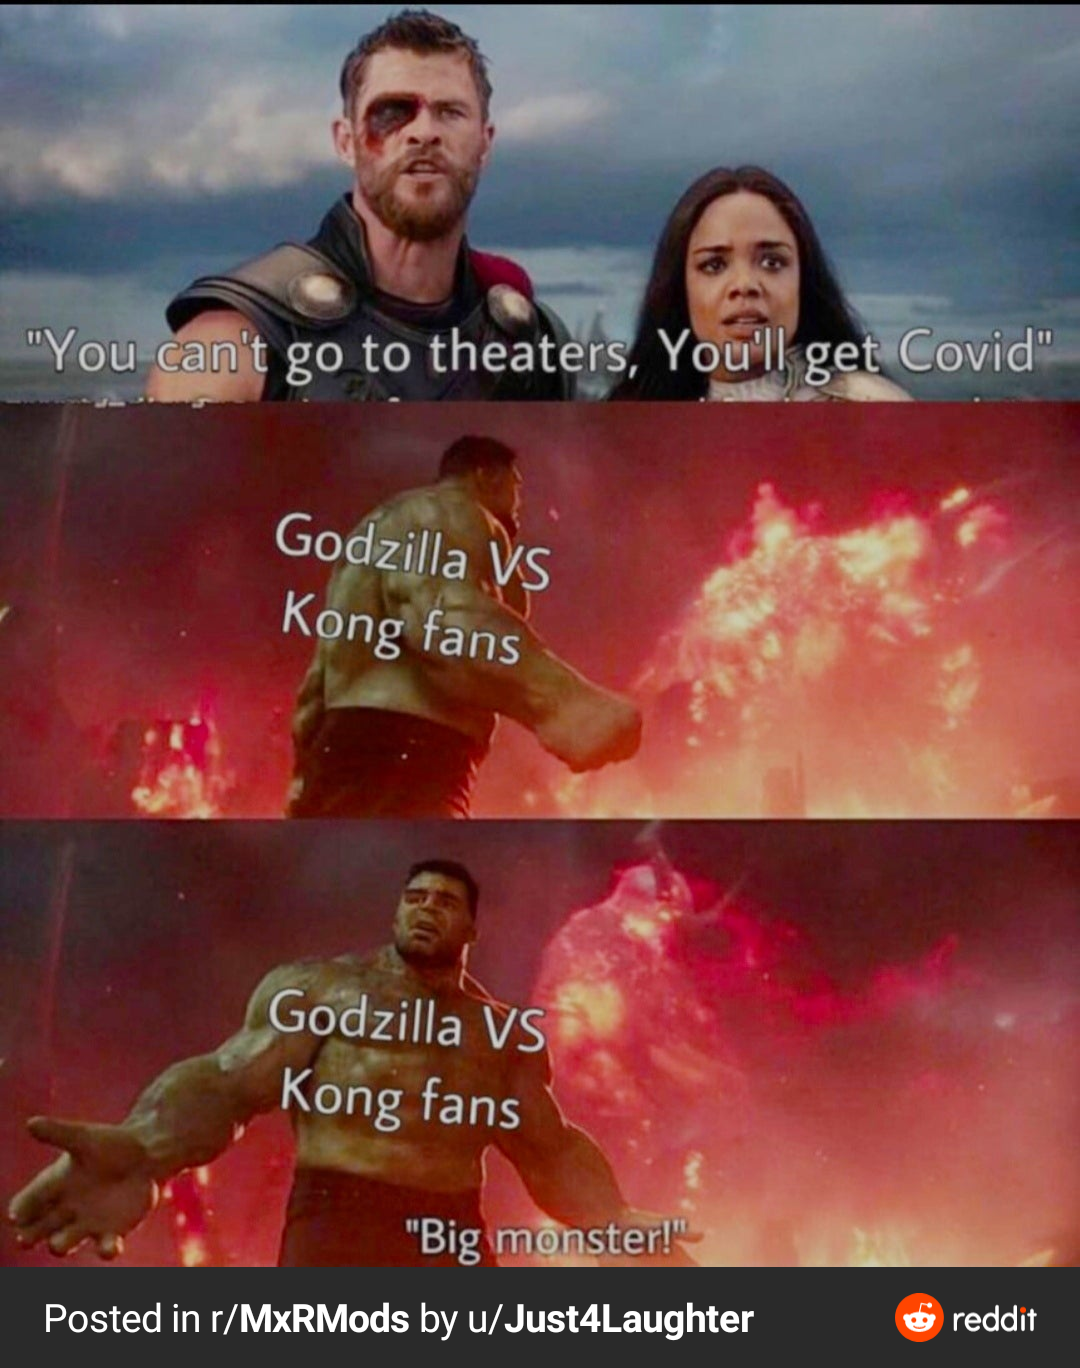 disappointed marvel meme - "You can't go to theaters, You'll get Covid" Godzilla Vs Kong fans Godzilla Vs Kong fans "Big monster! Posted in rMxRMods by uJust4Laughter reddit